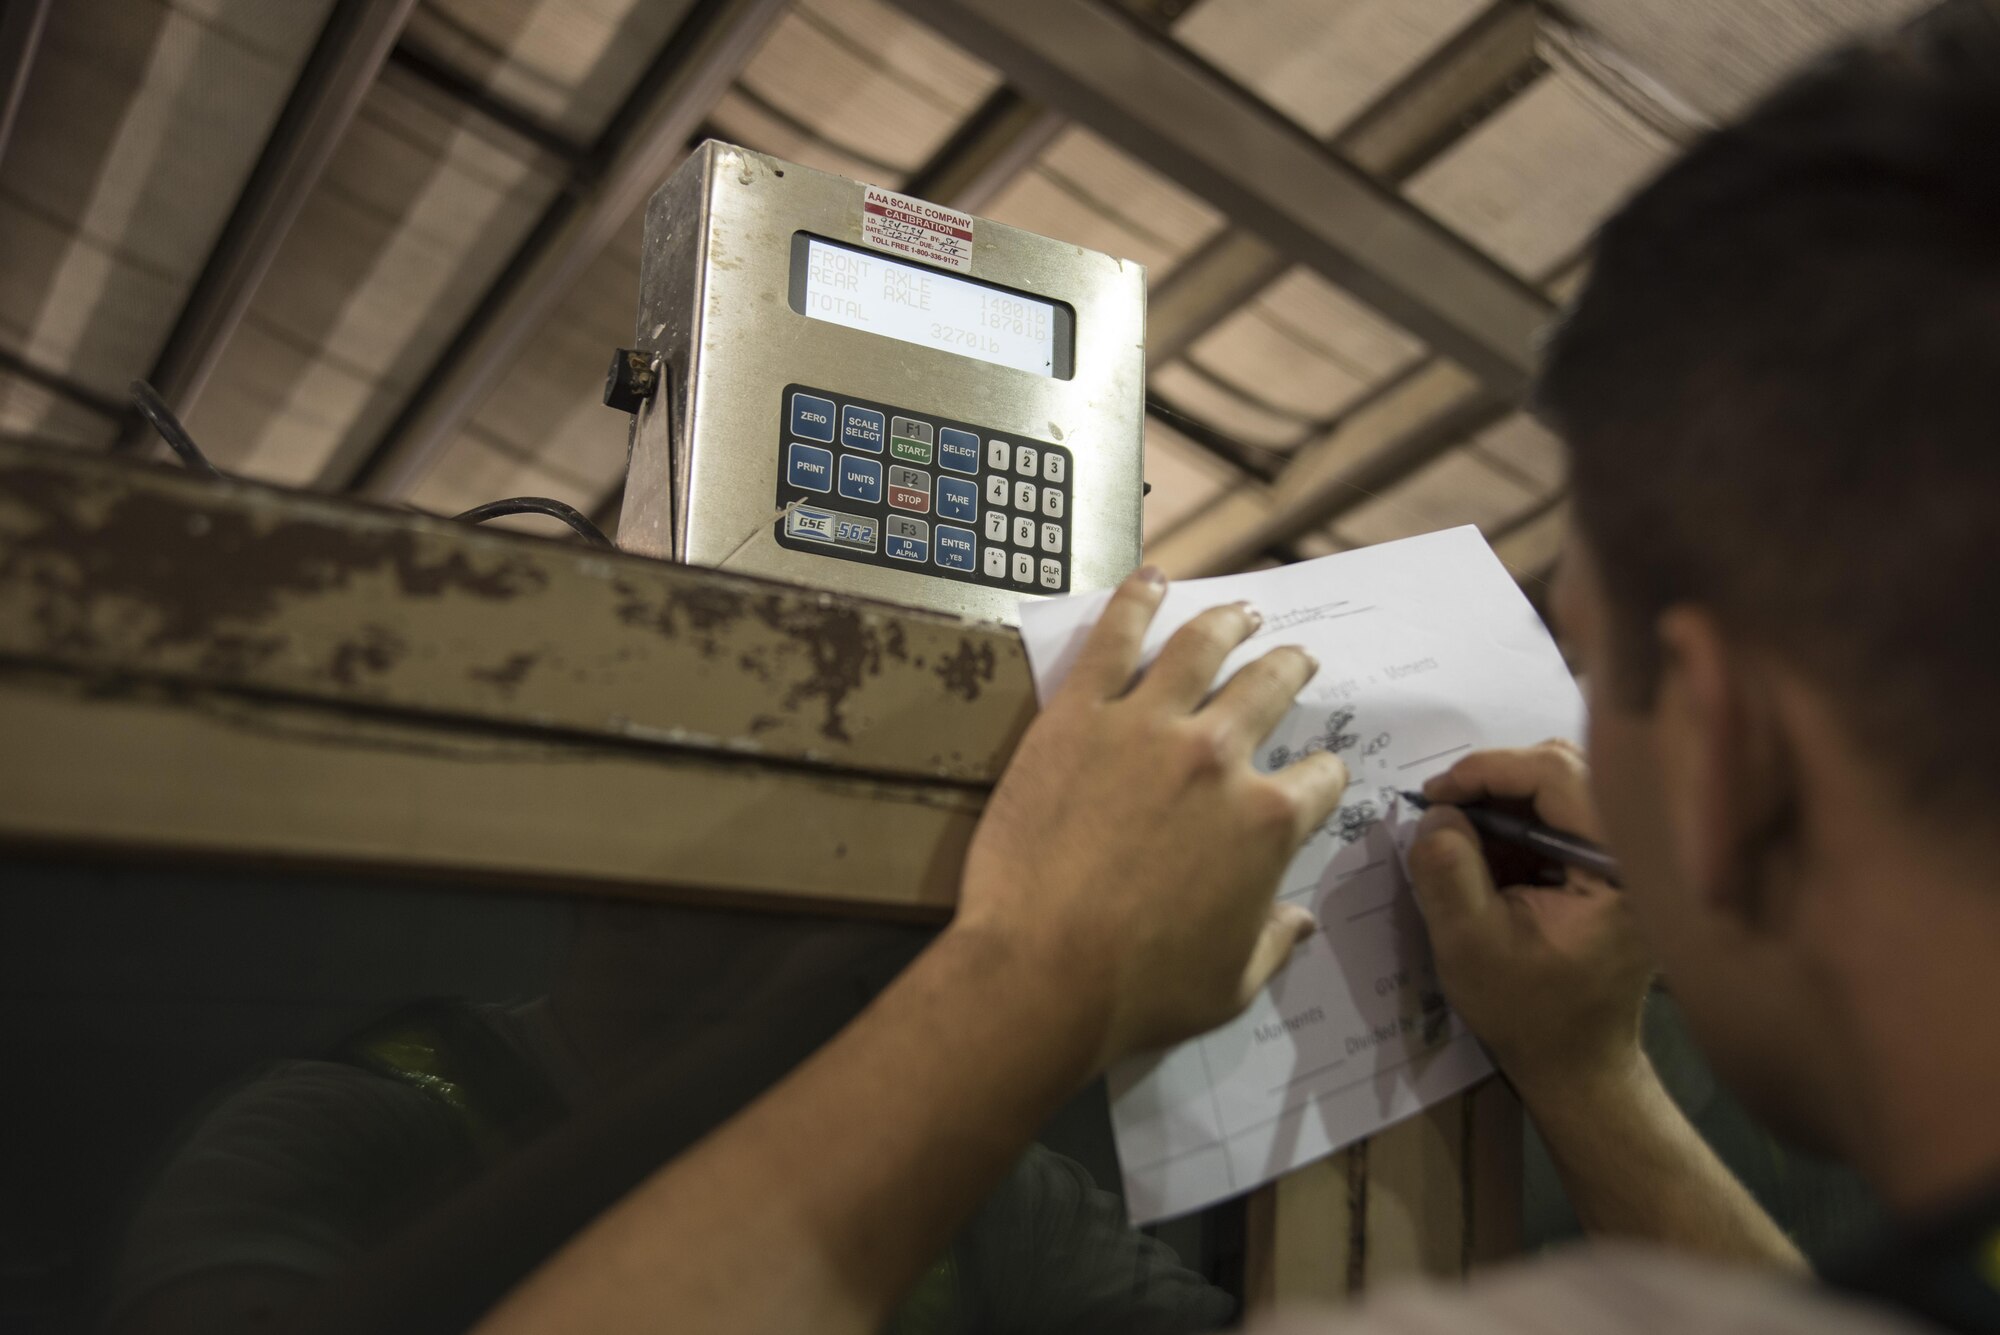 Airman 1st Class Dillon Walker, 4th Logistics Readiness Squadron travel management office, completes paperwork for cargo July 20, 2017, at Seymour Johnson Air Force Base, North Carolina. The cargo is weighed based on its front and rear axle to ensure it can safely be loaded onto an aircraft. (U.S. Air Force photo by Tech. Sgt. David W. Carbajal)